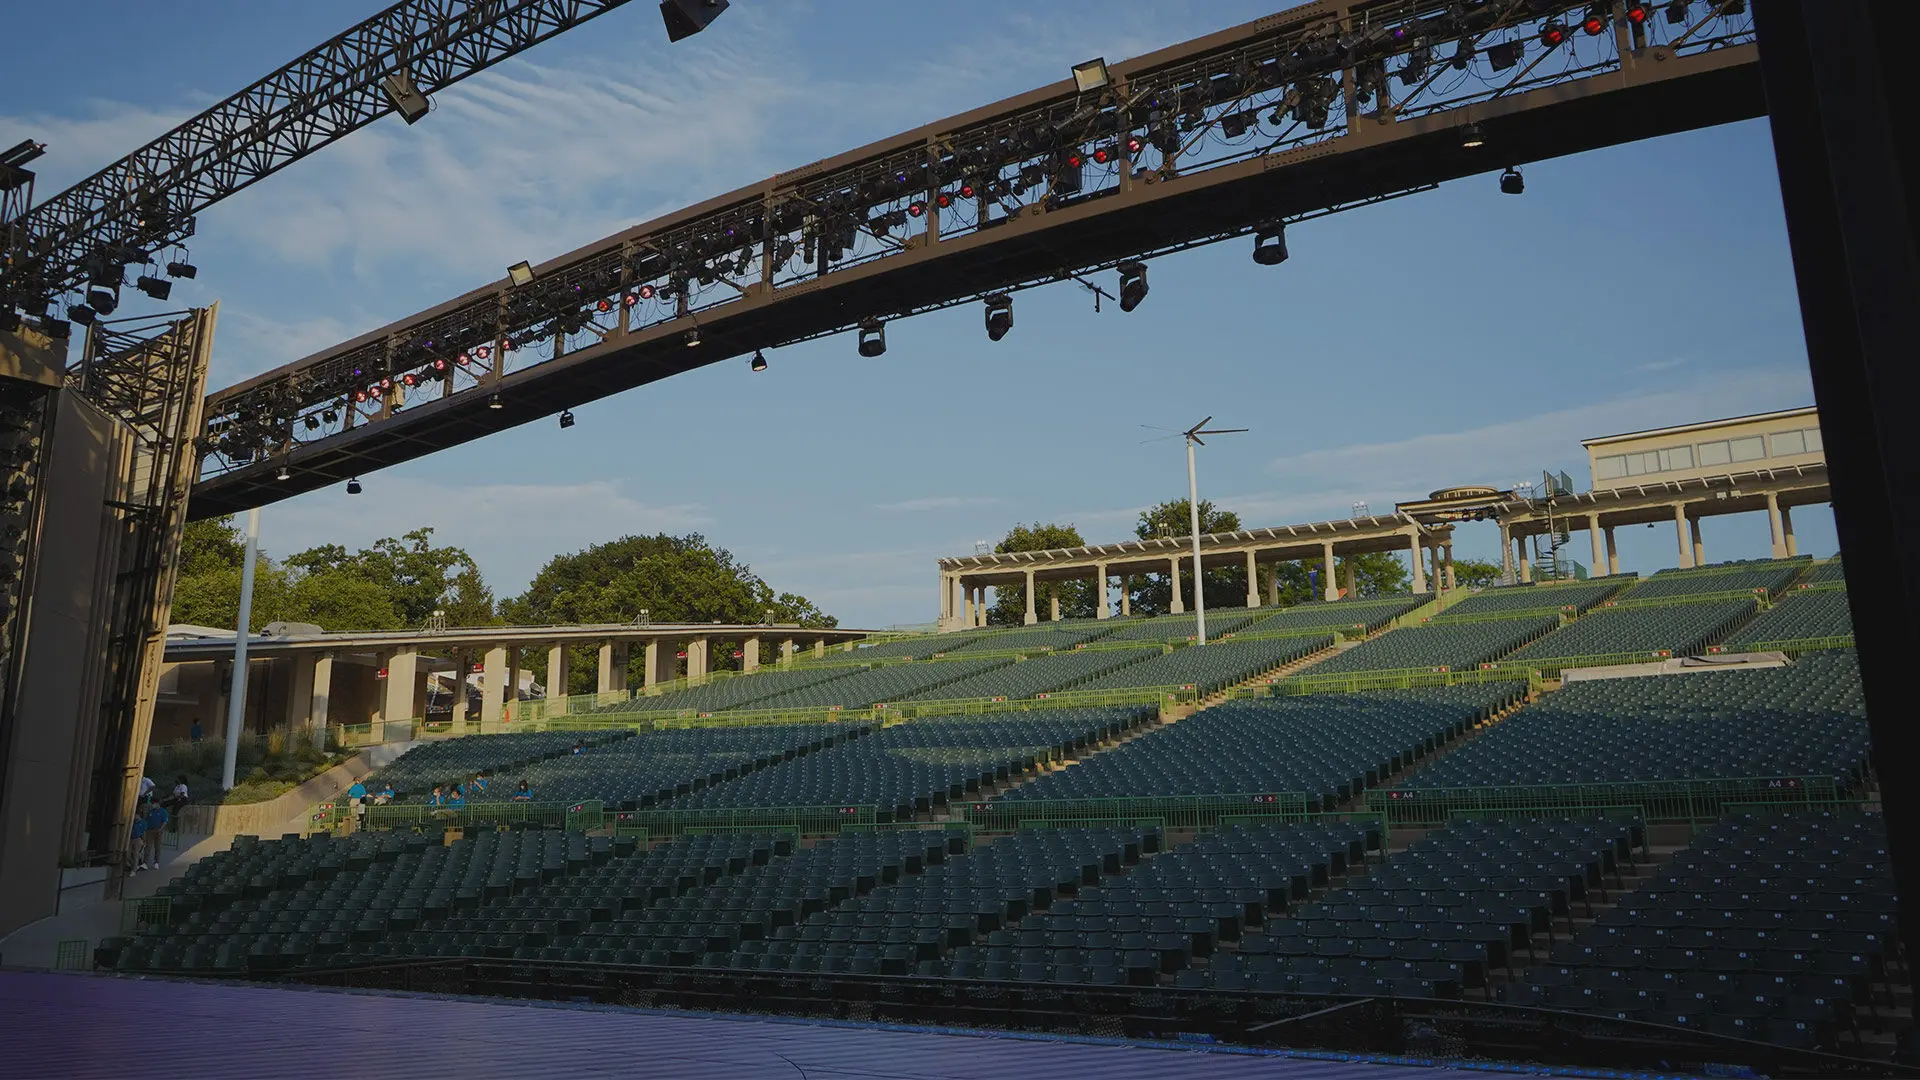 Muny 2022 Schedule The Muny - America's Oldest And Largest Outdoor Musical Theatre